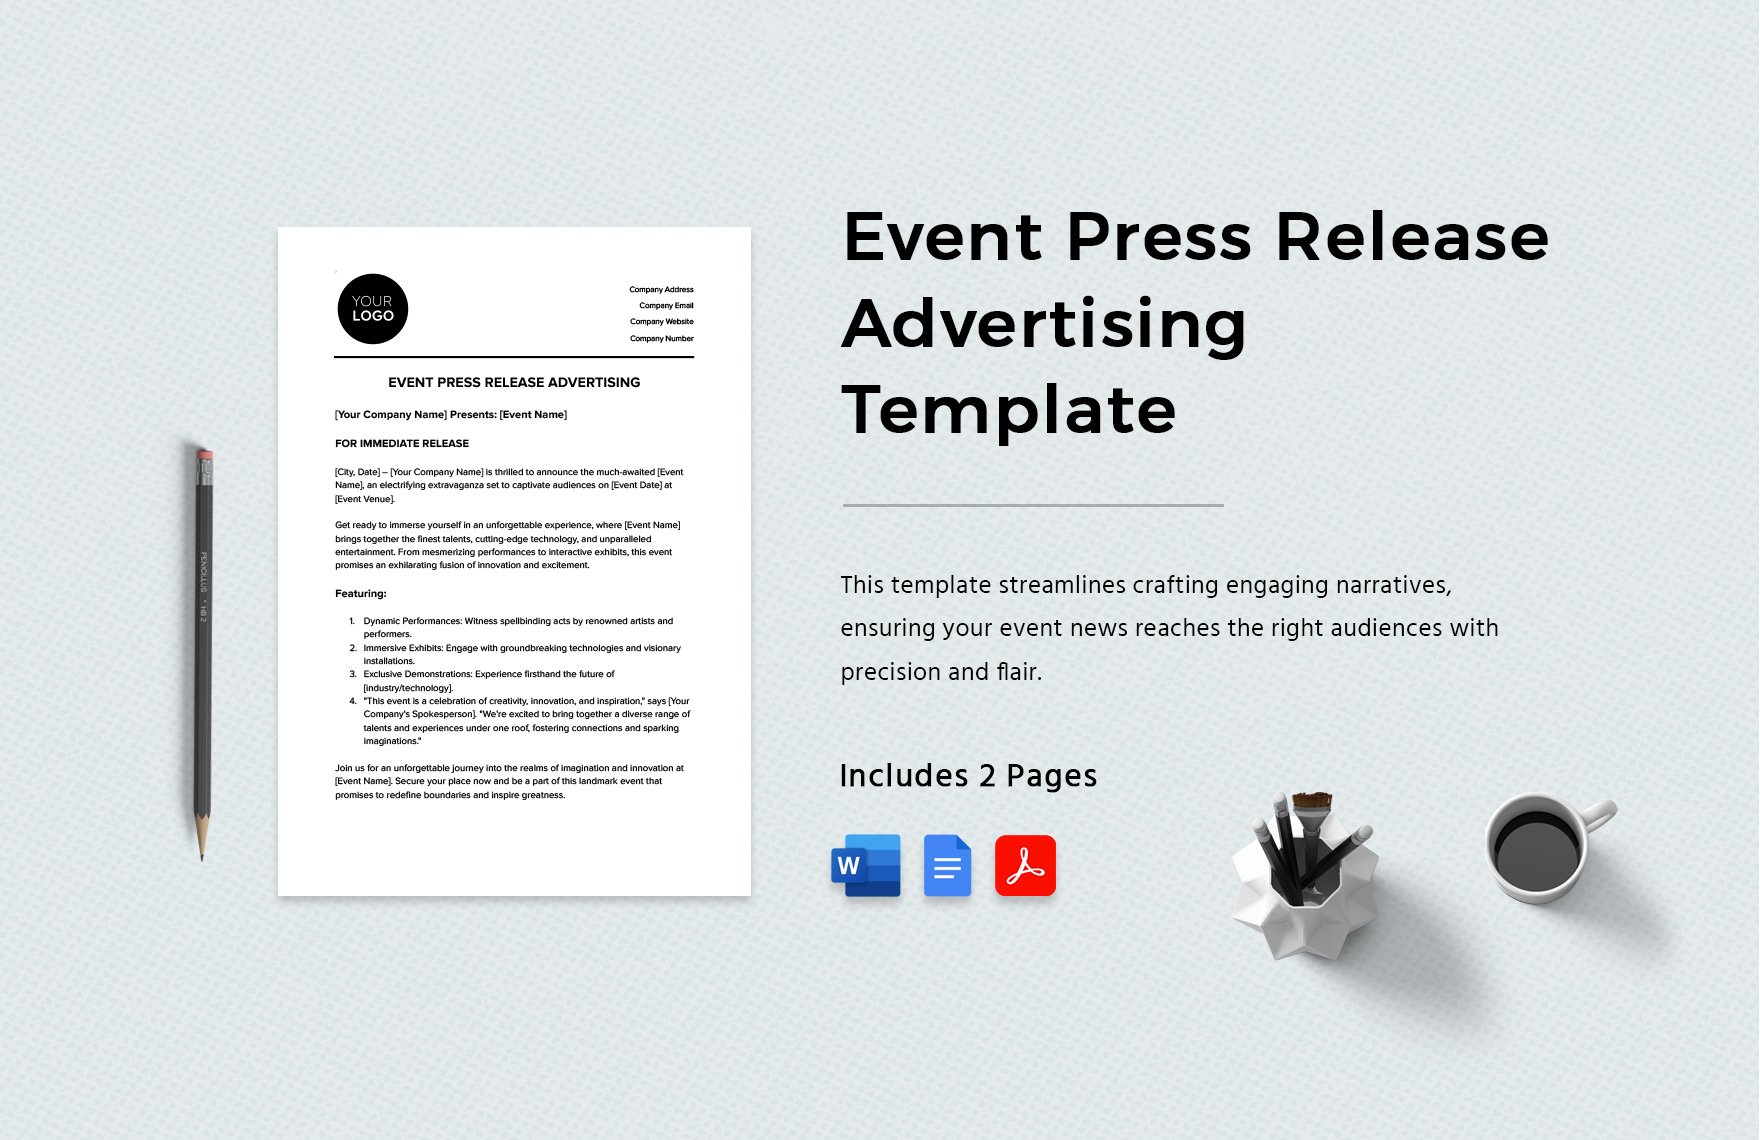 Event Press Release Advertising Template